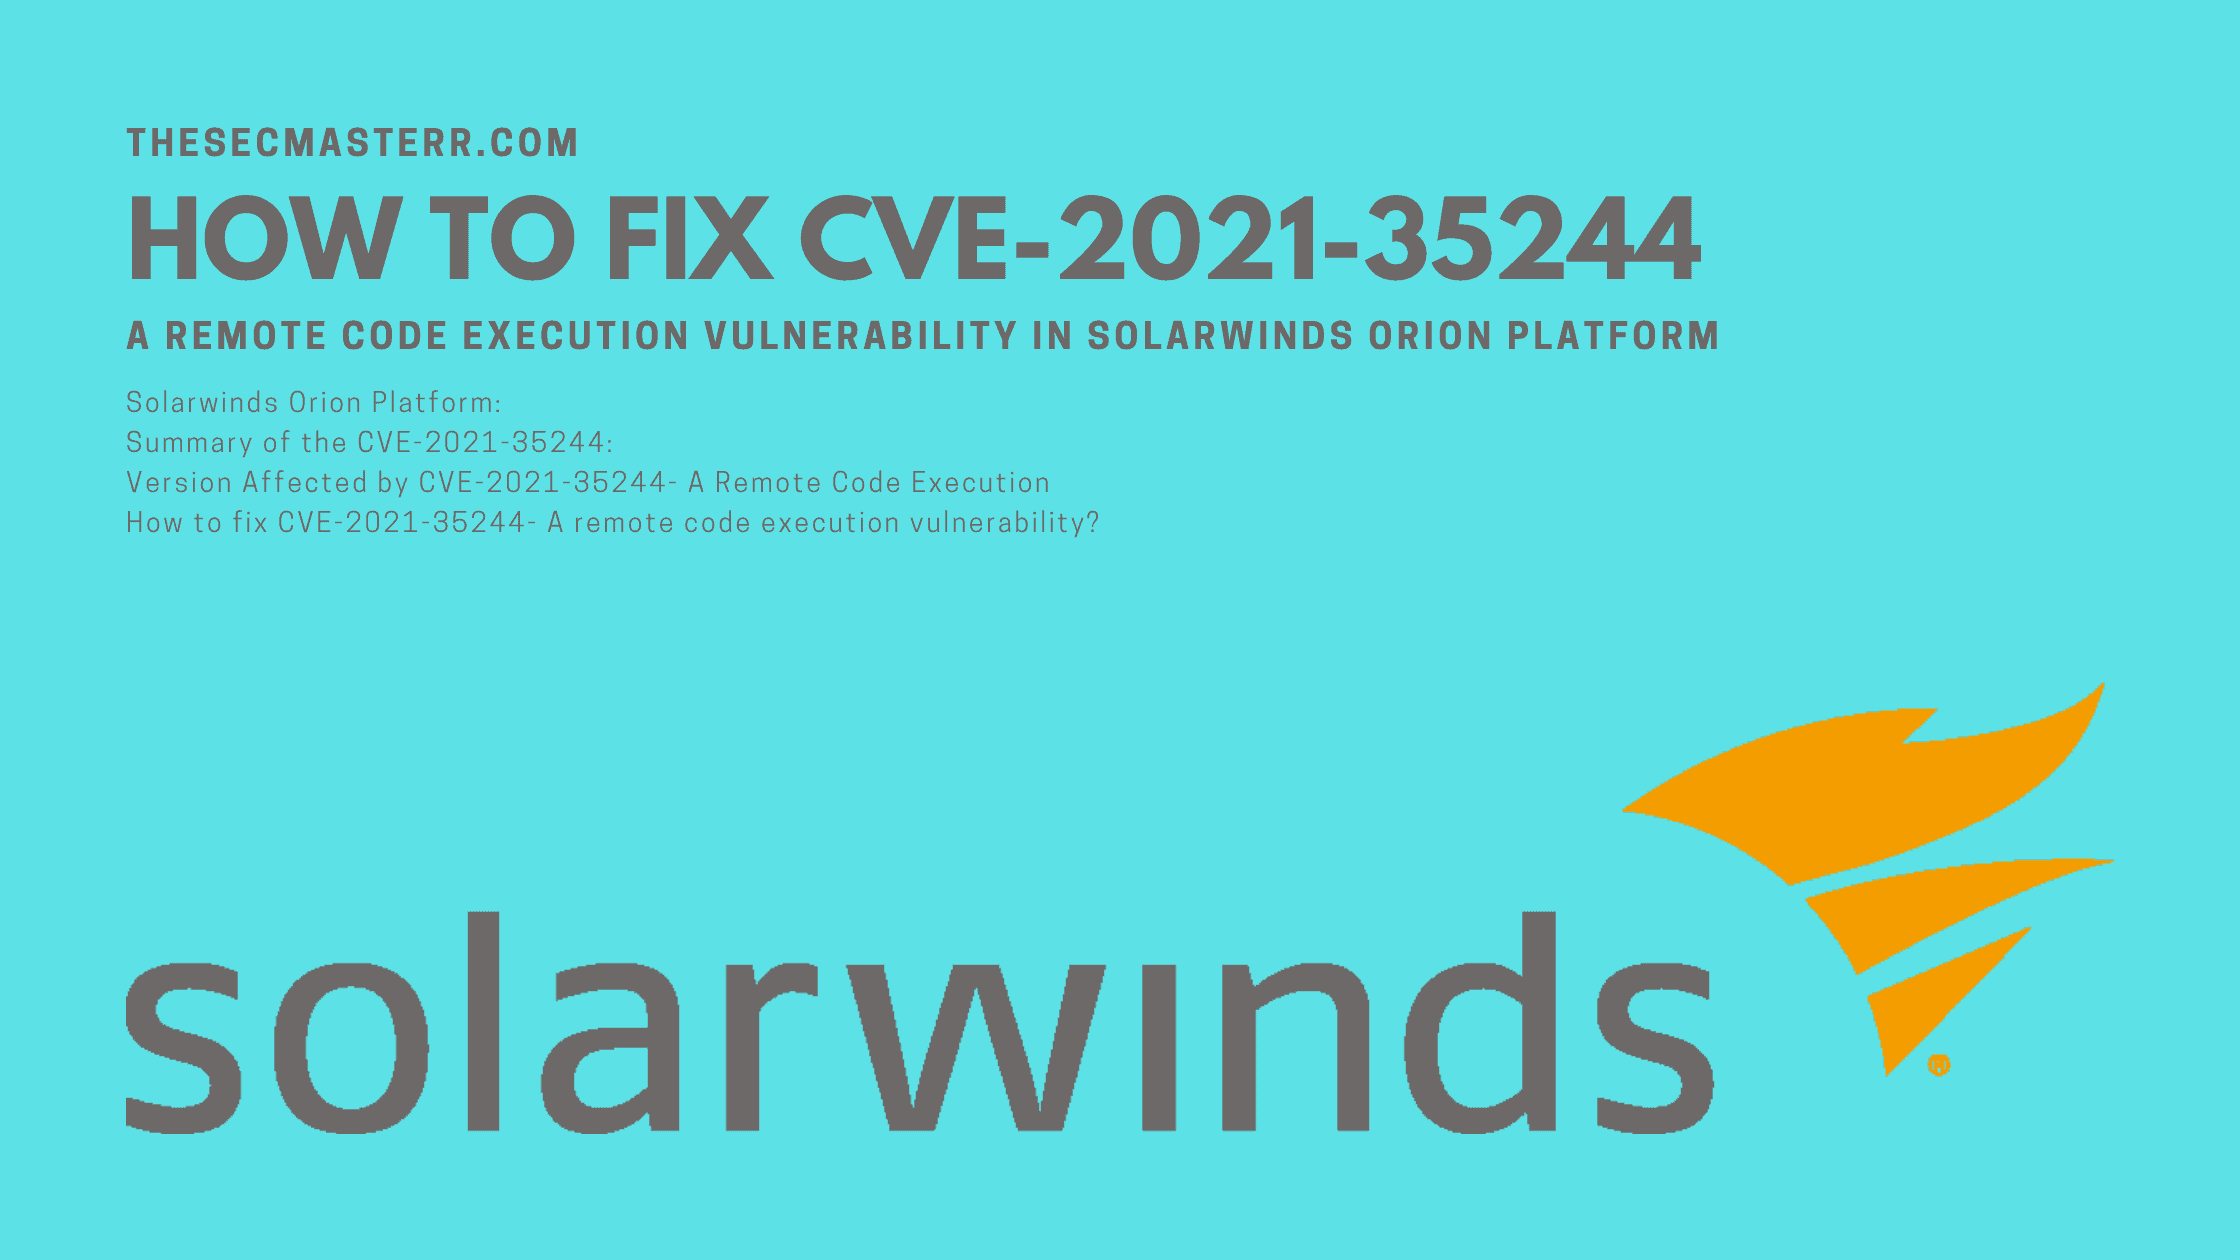 How To Fix Cve 2021 35244 A Remote Code Execution Vulnerability In Solarwinds Orion Platform